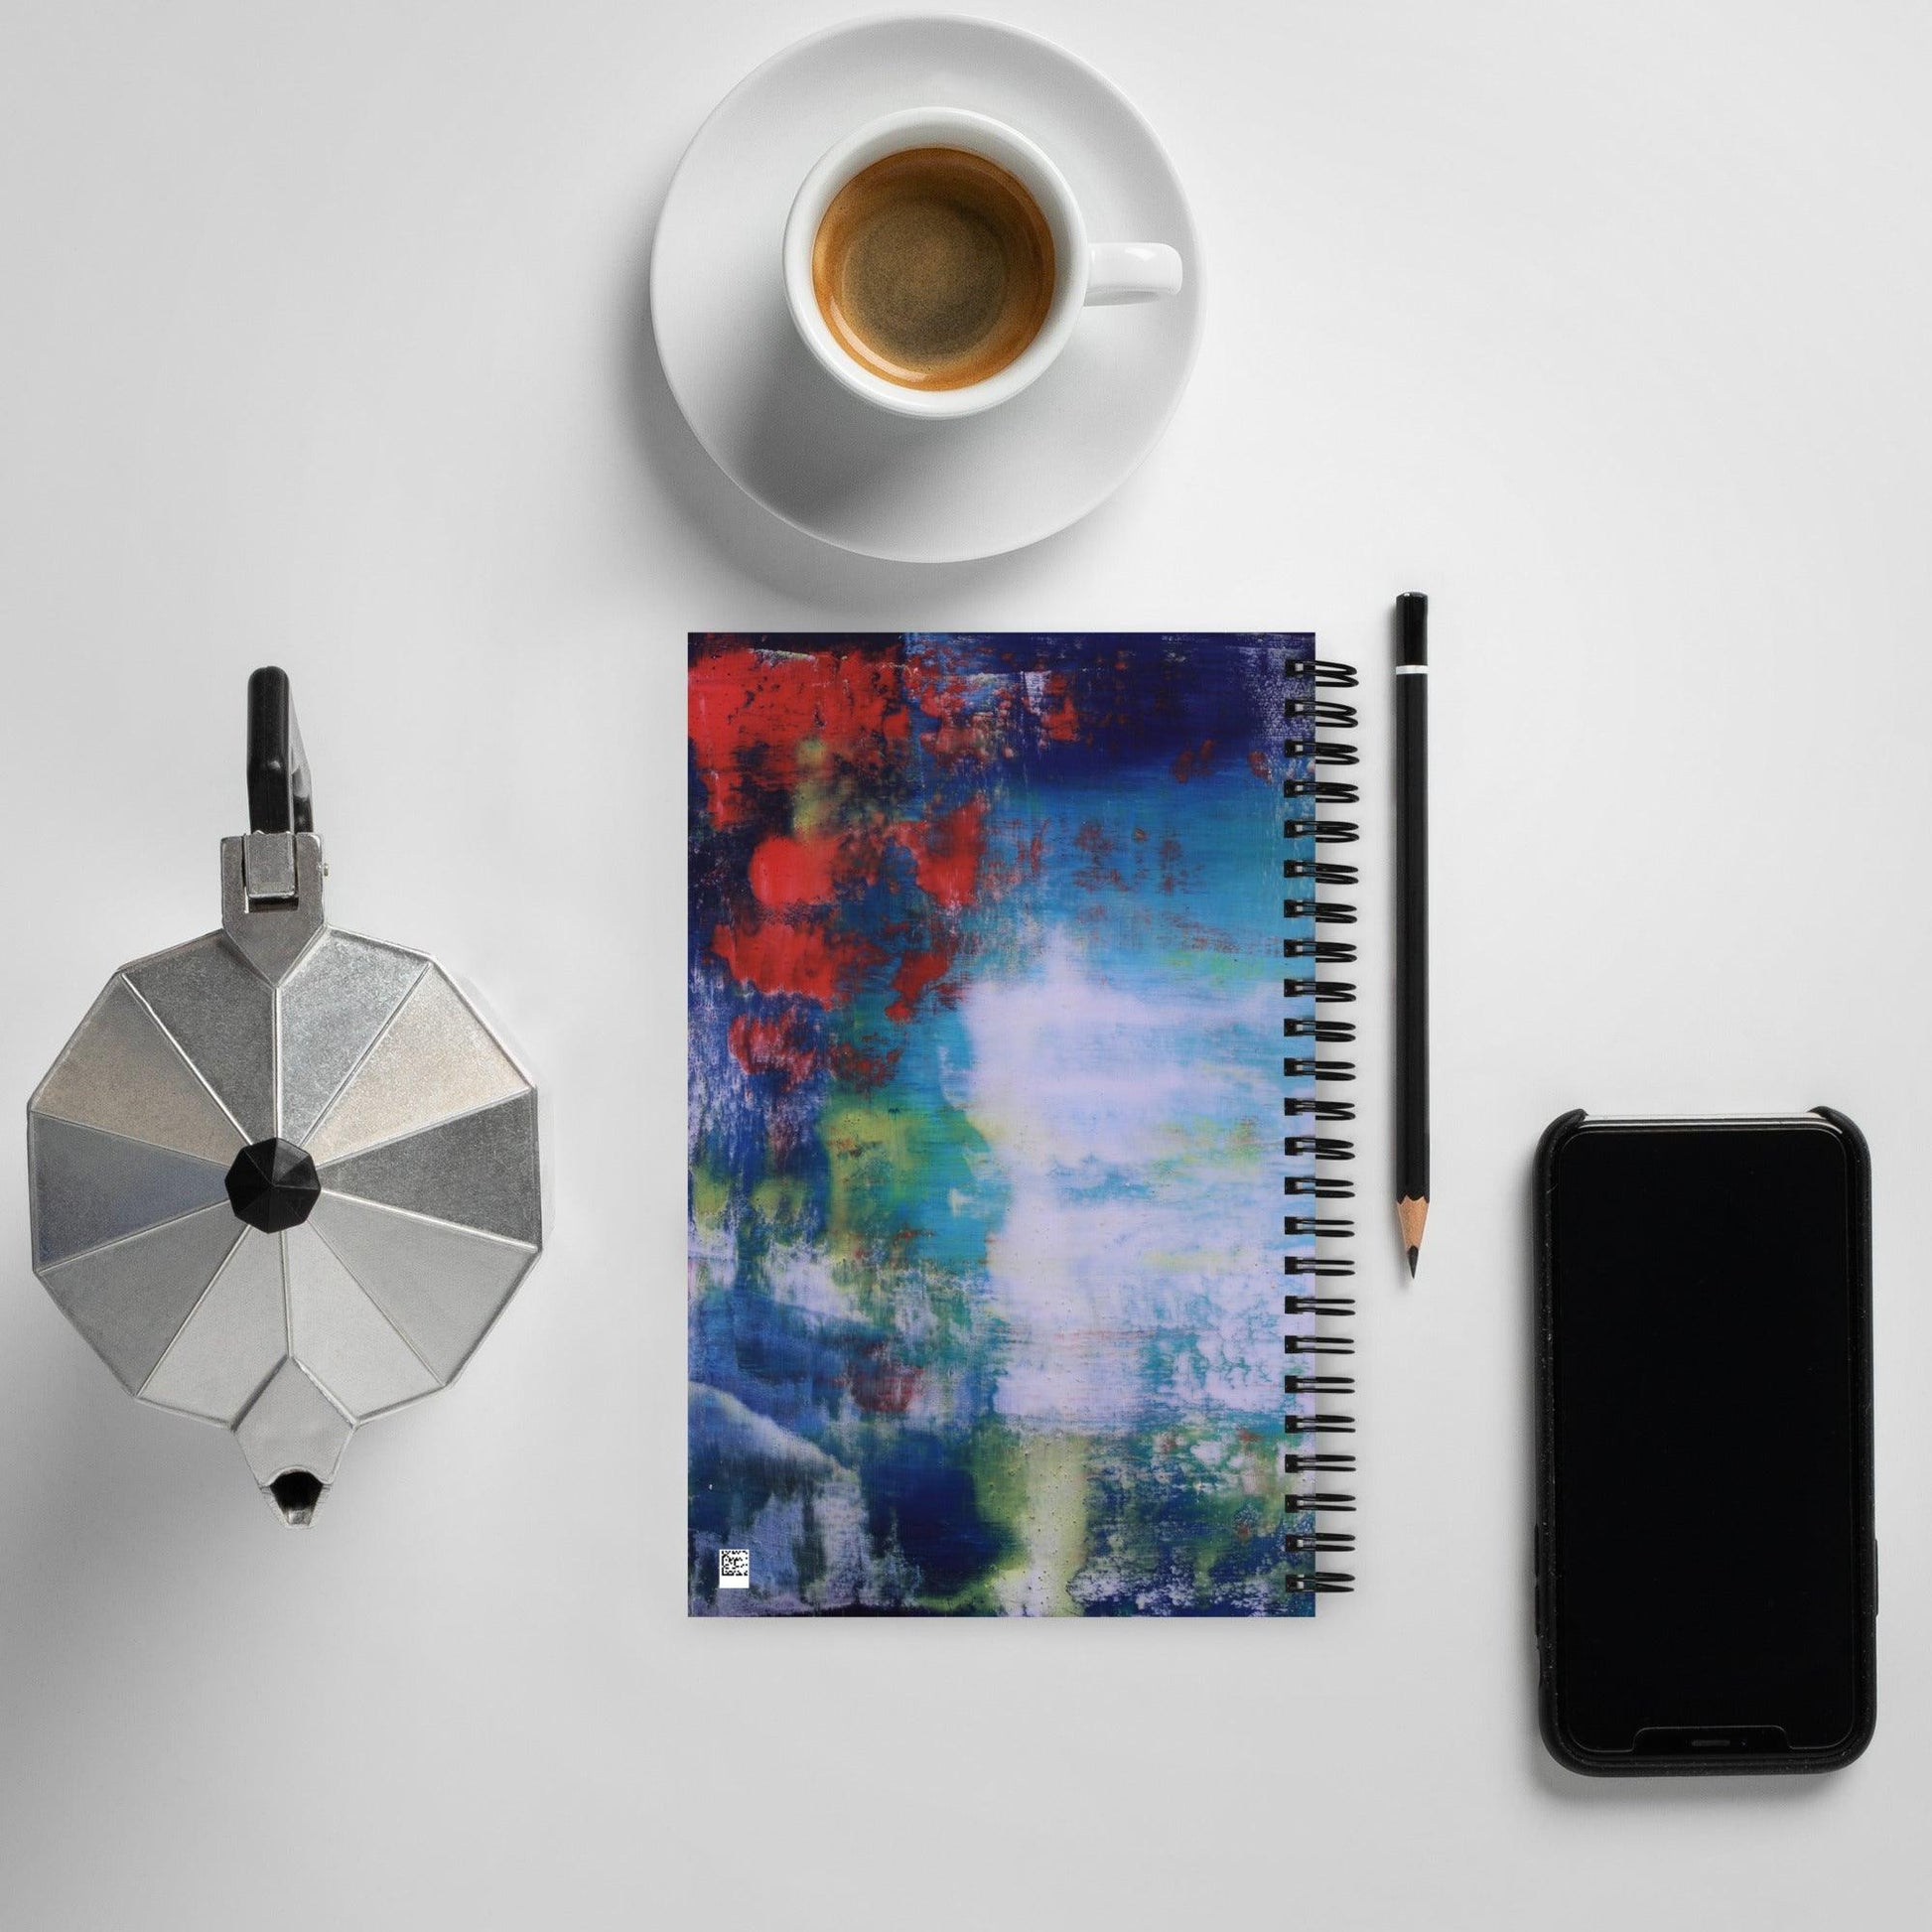 "Autumn Reflections" Spiral notebook-Spiral Notebook - Mike Giannella - Encaustic Painting - Mixed Media Artist - Art Prints